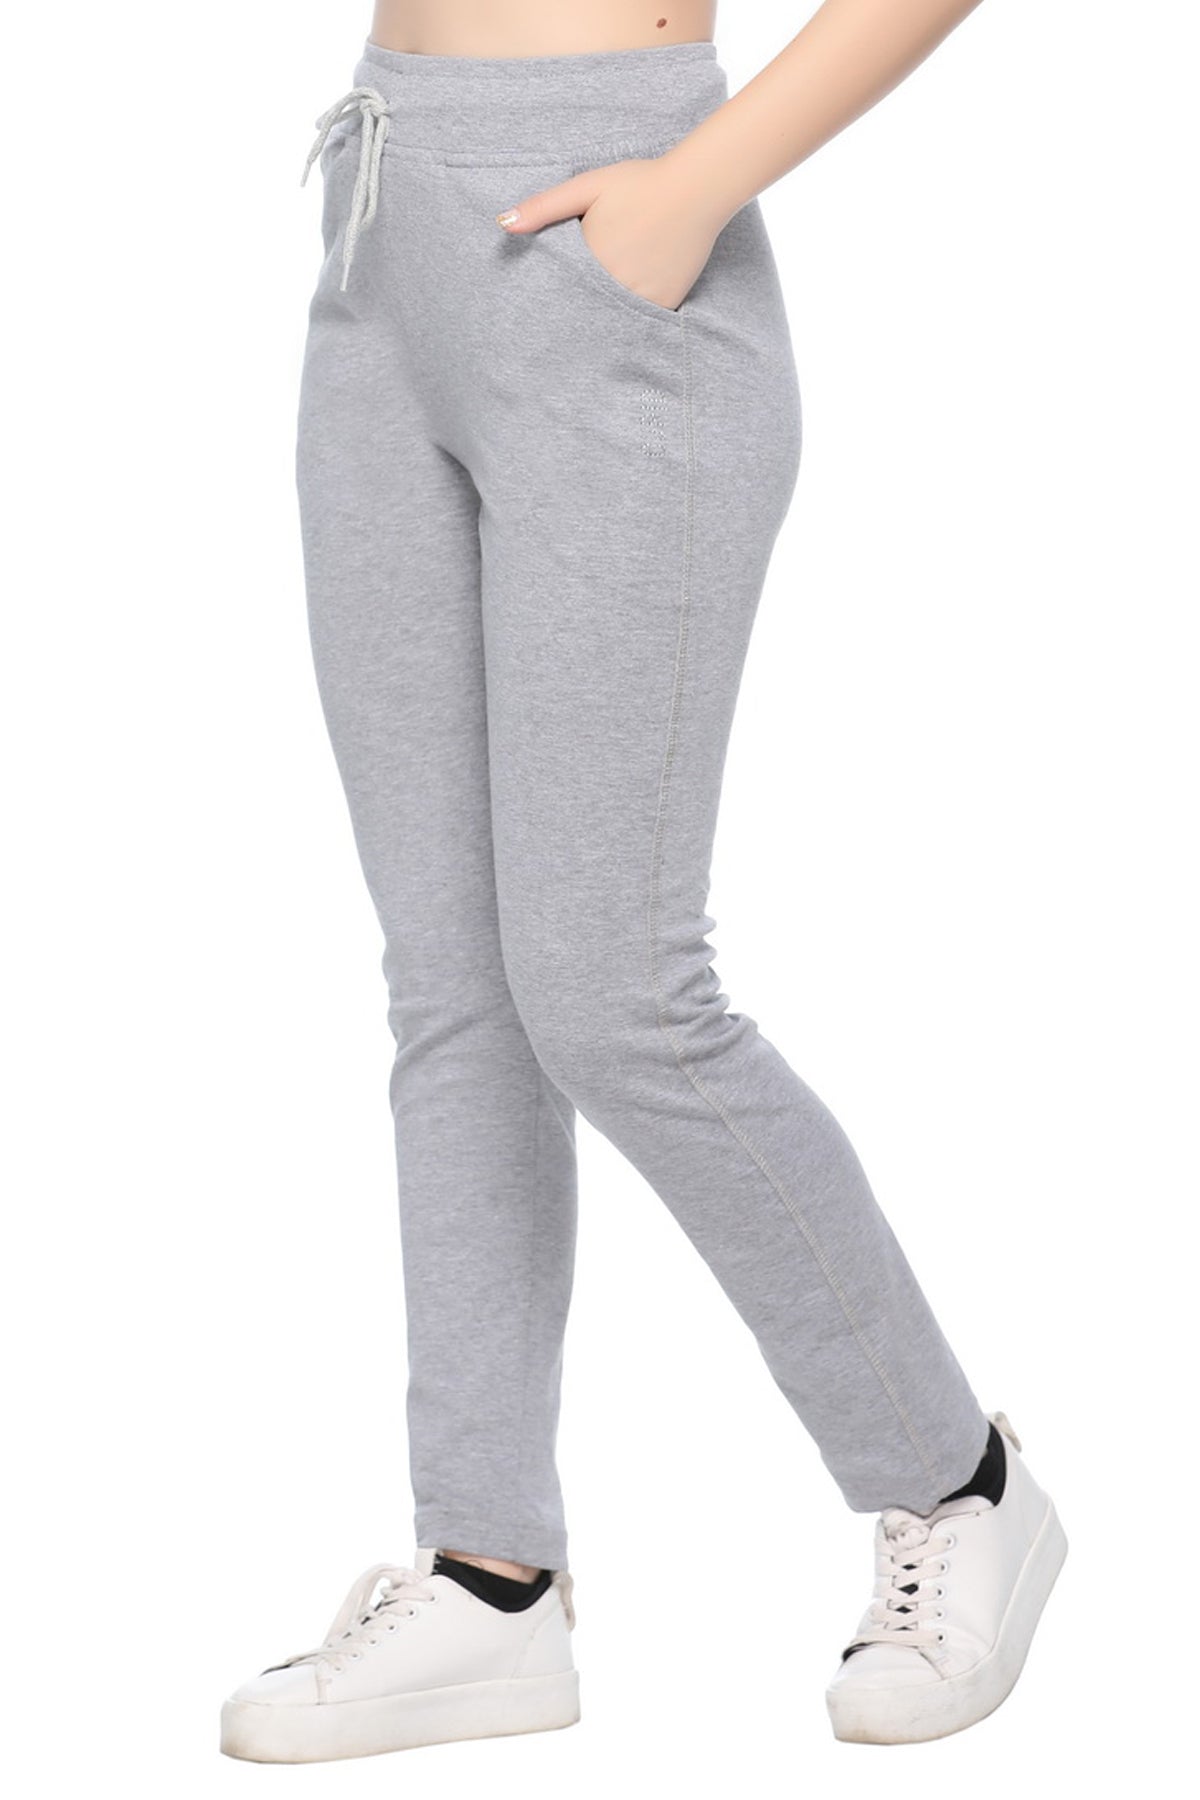 Buy BLUECON Cotton Lower for Womens| Track Pant for Women| Women Tights  Active Sports Gym Wear Joggers Pants Light Grey at Amazon.in